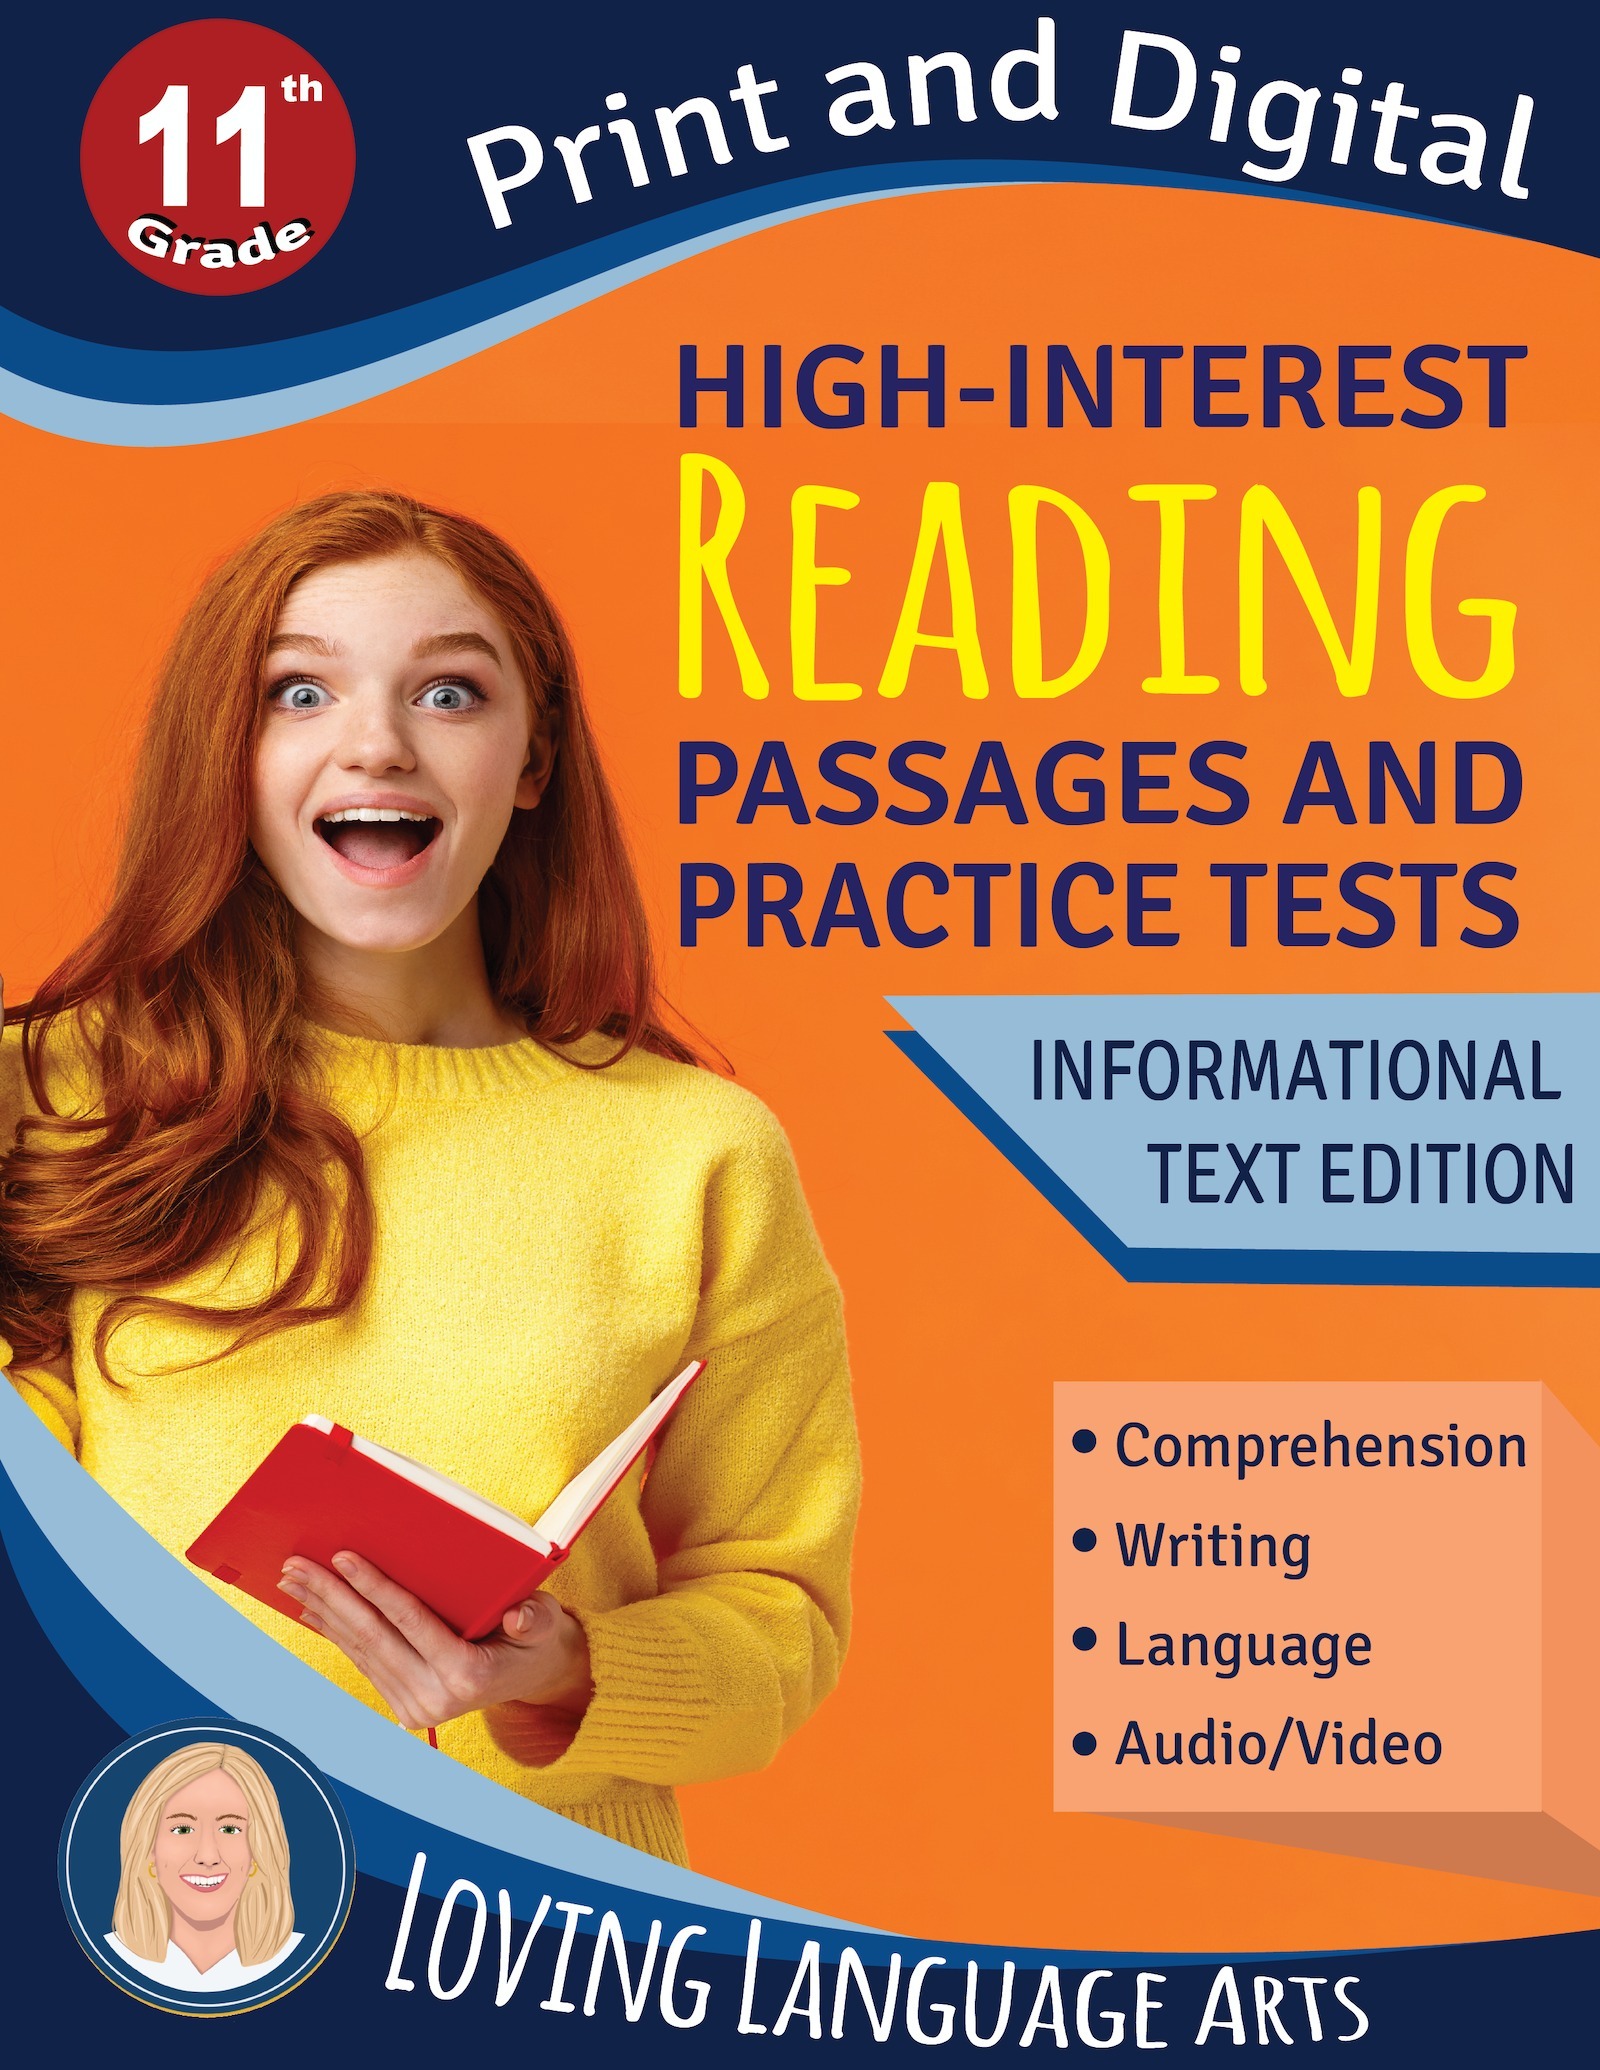 11th grade language arts workbook - High-interest passages and practice tests.